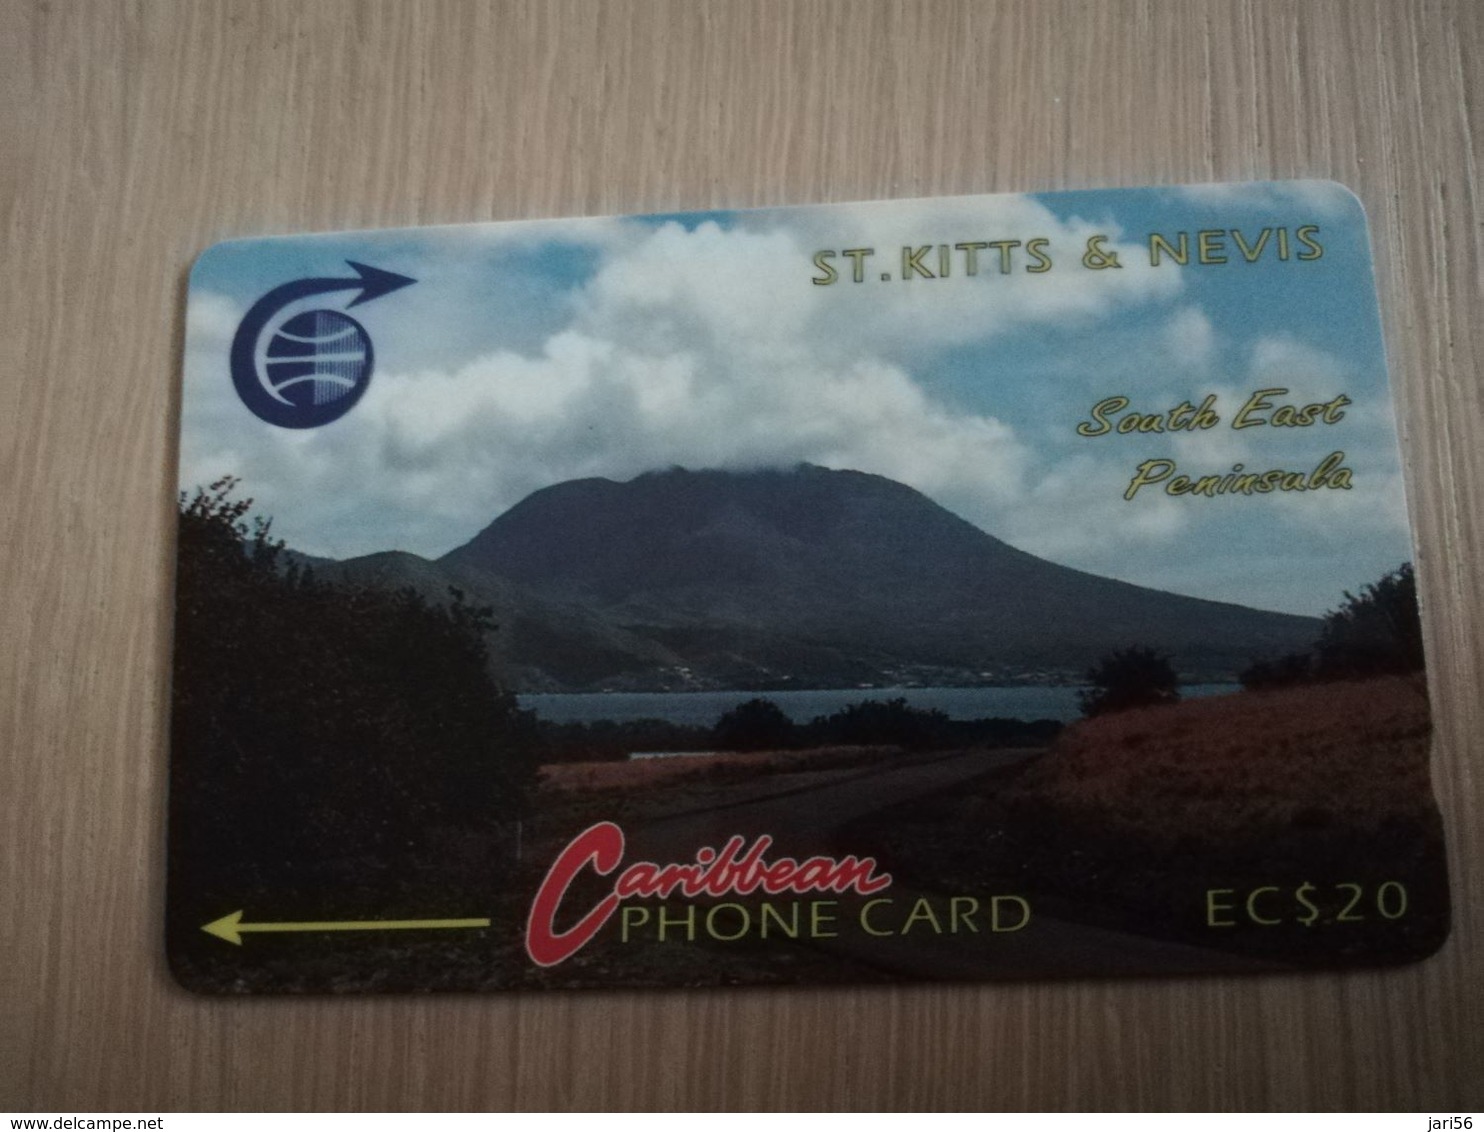 ST KITTS & NEVIS   GPT CARD $20,-   3CSKD     NO STK-3D   SOUTH EAST PENINSULA 2    Fine Used Card  **2331** - St. Kitts & Nevis